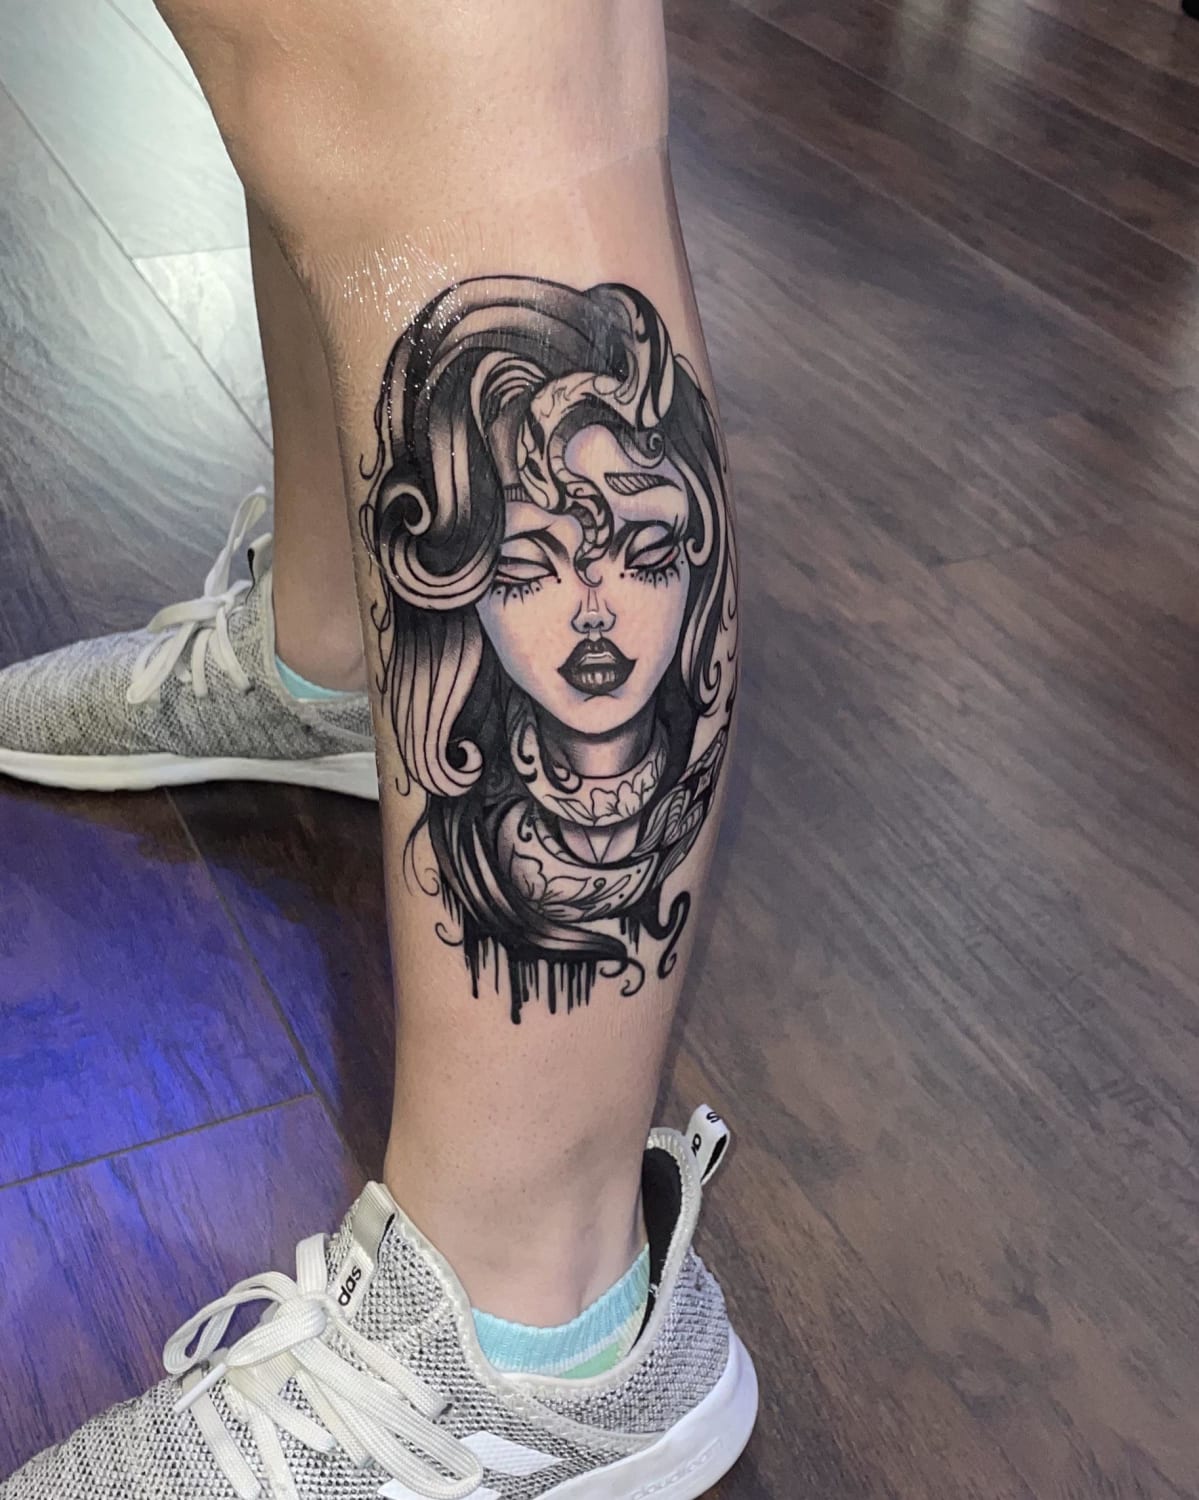 Calf tattoo done by Raine at Black Sheep in Fort Wayne